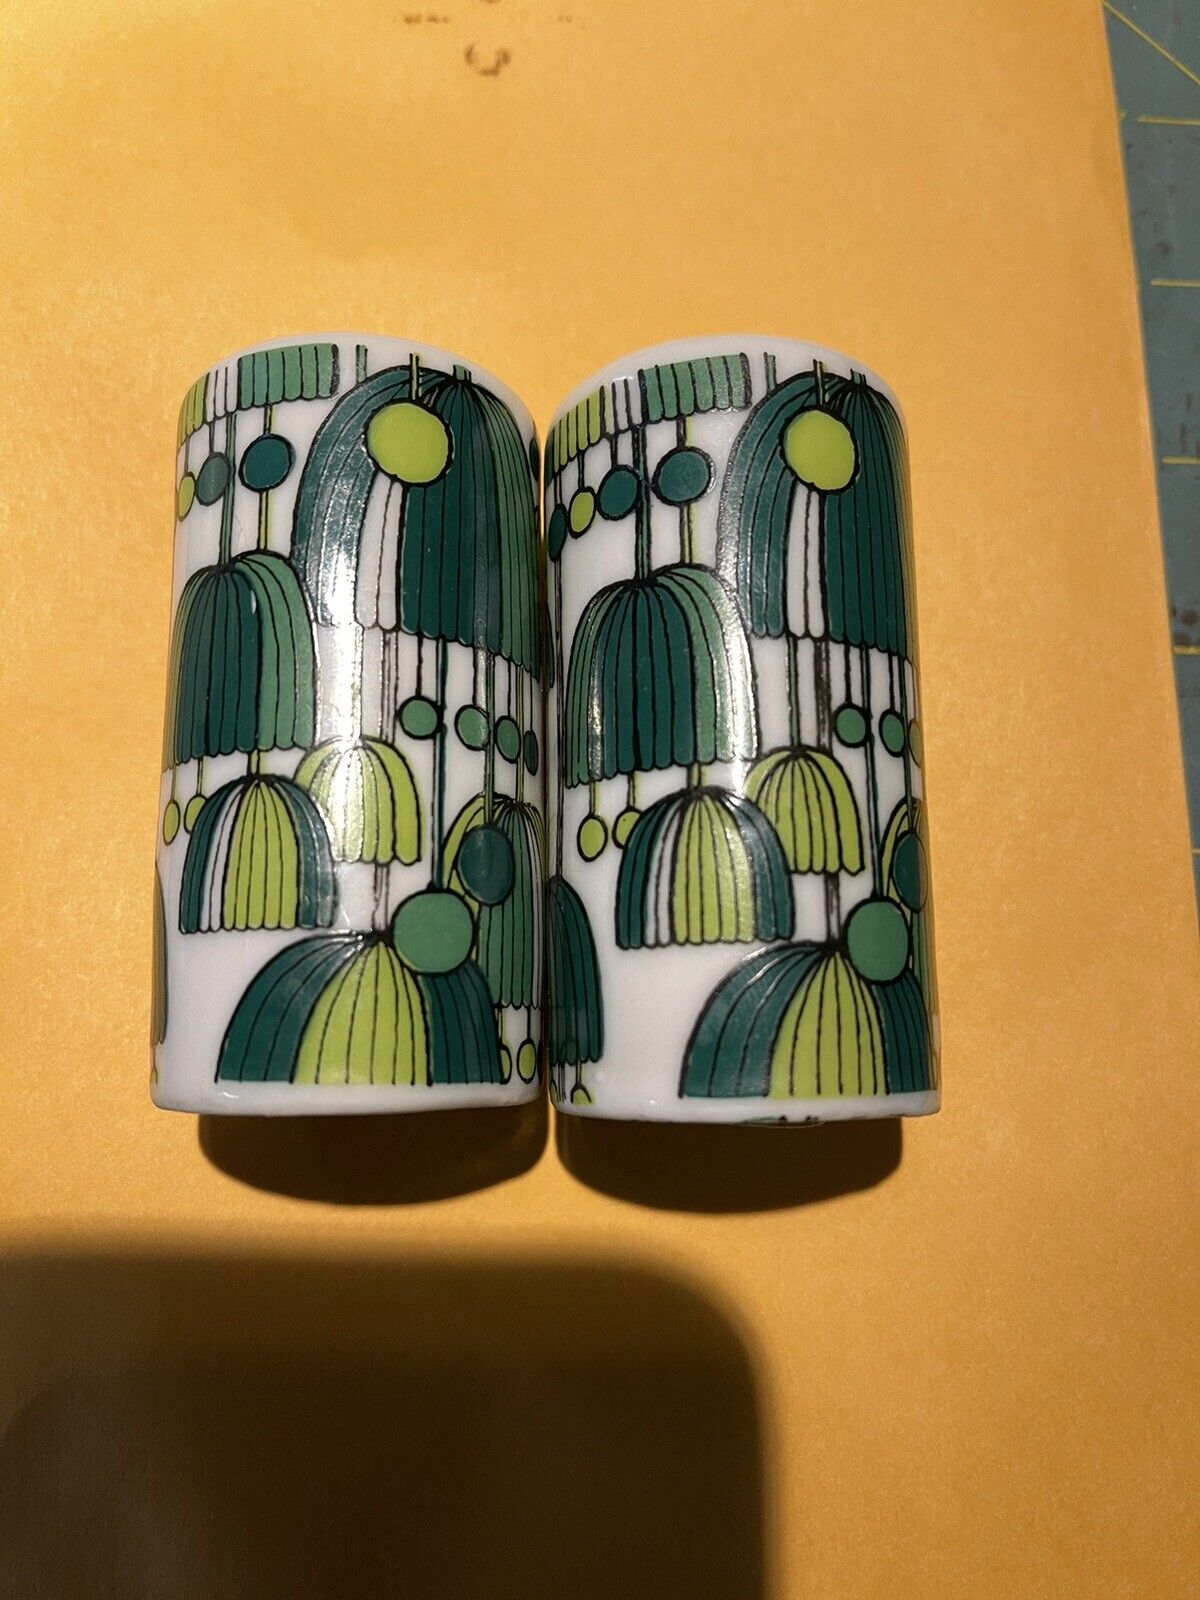 1960s Funky Green Lamp Shade with Tassels Design Salt and Pepper Shakers